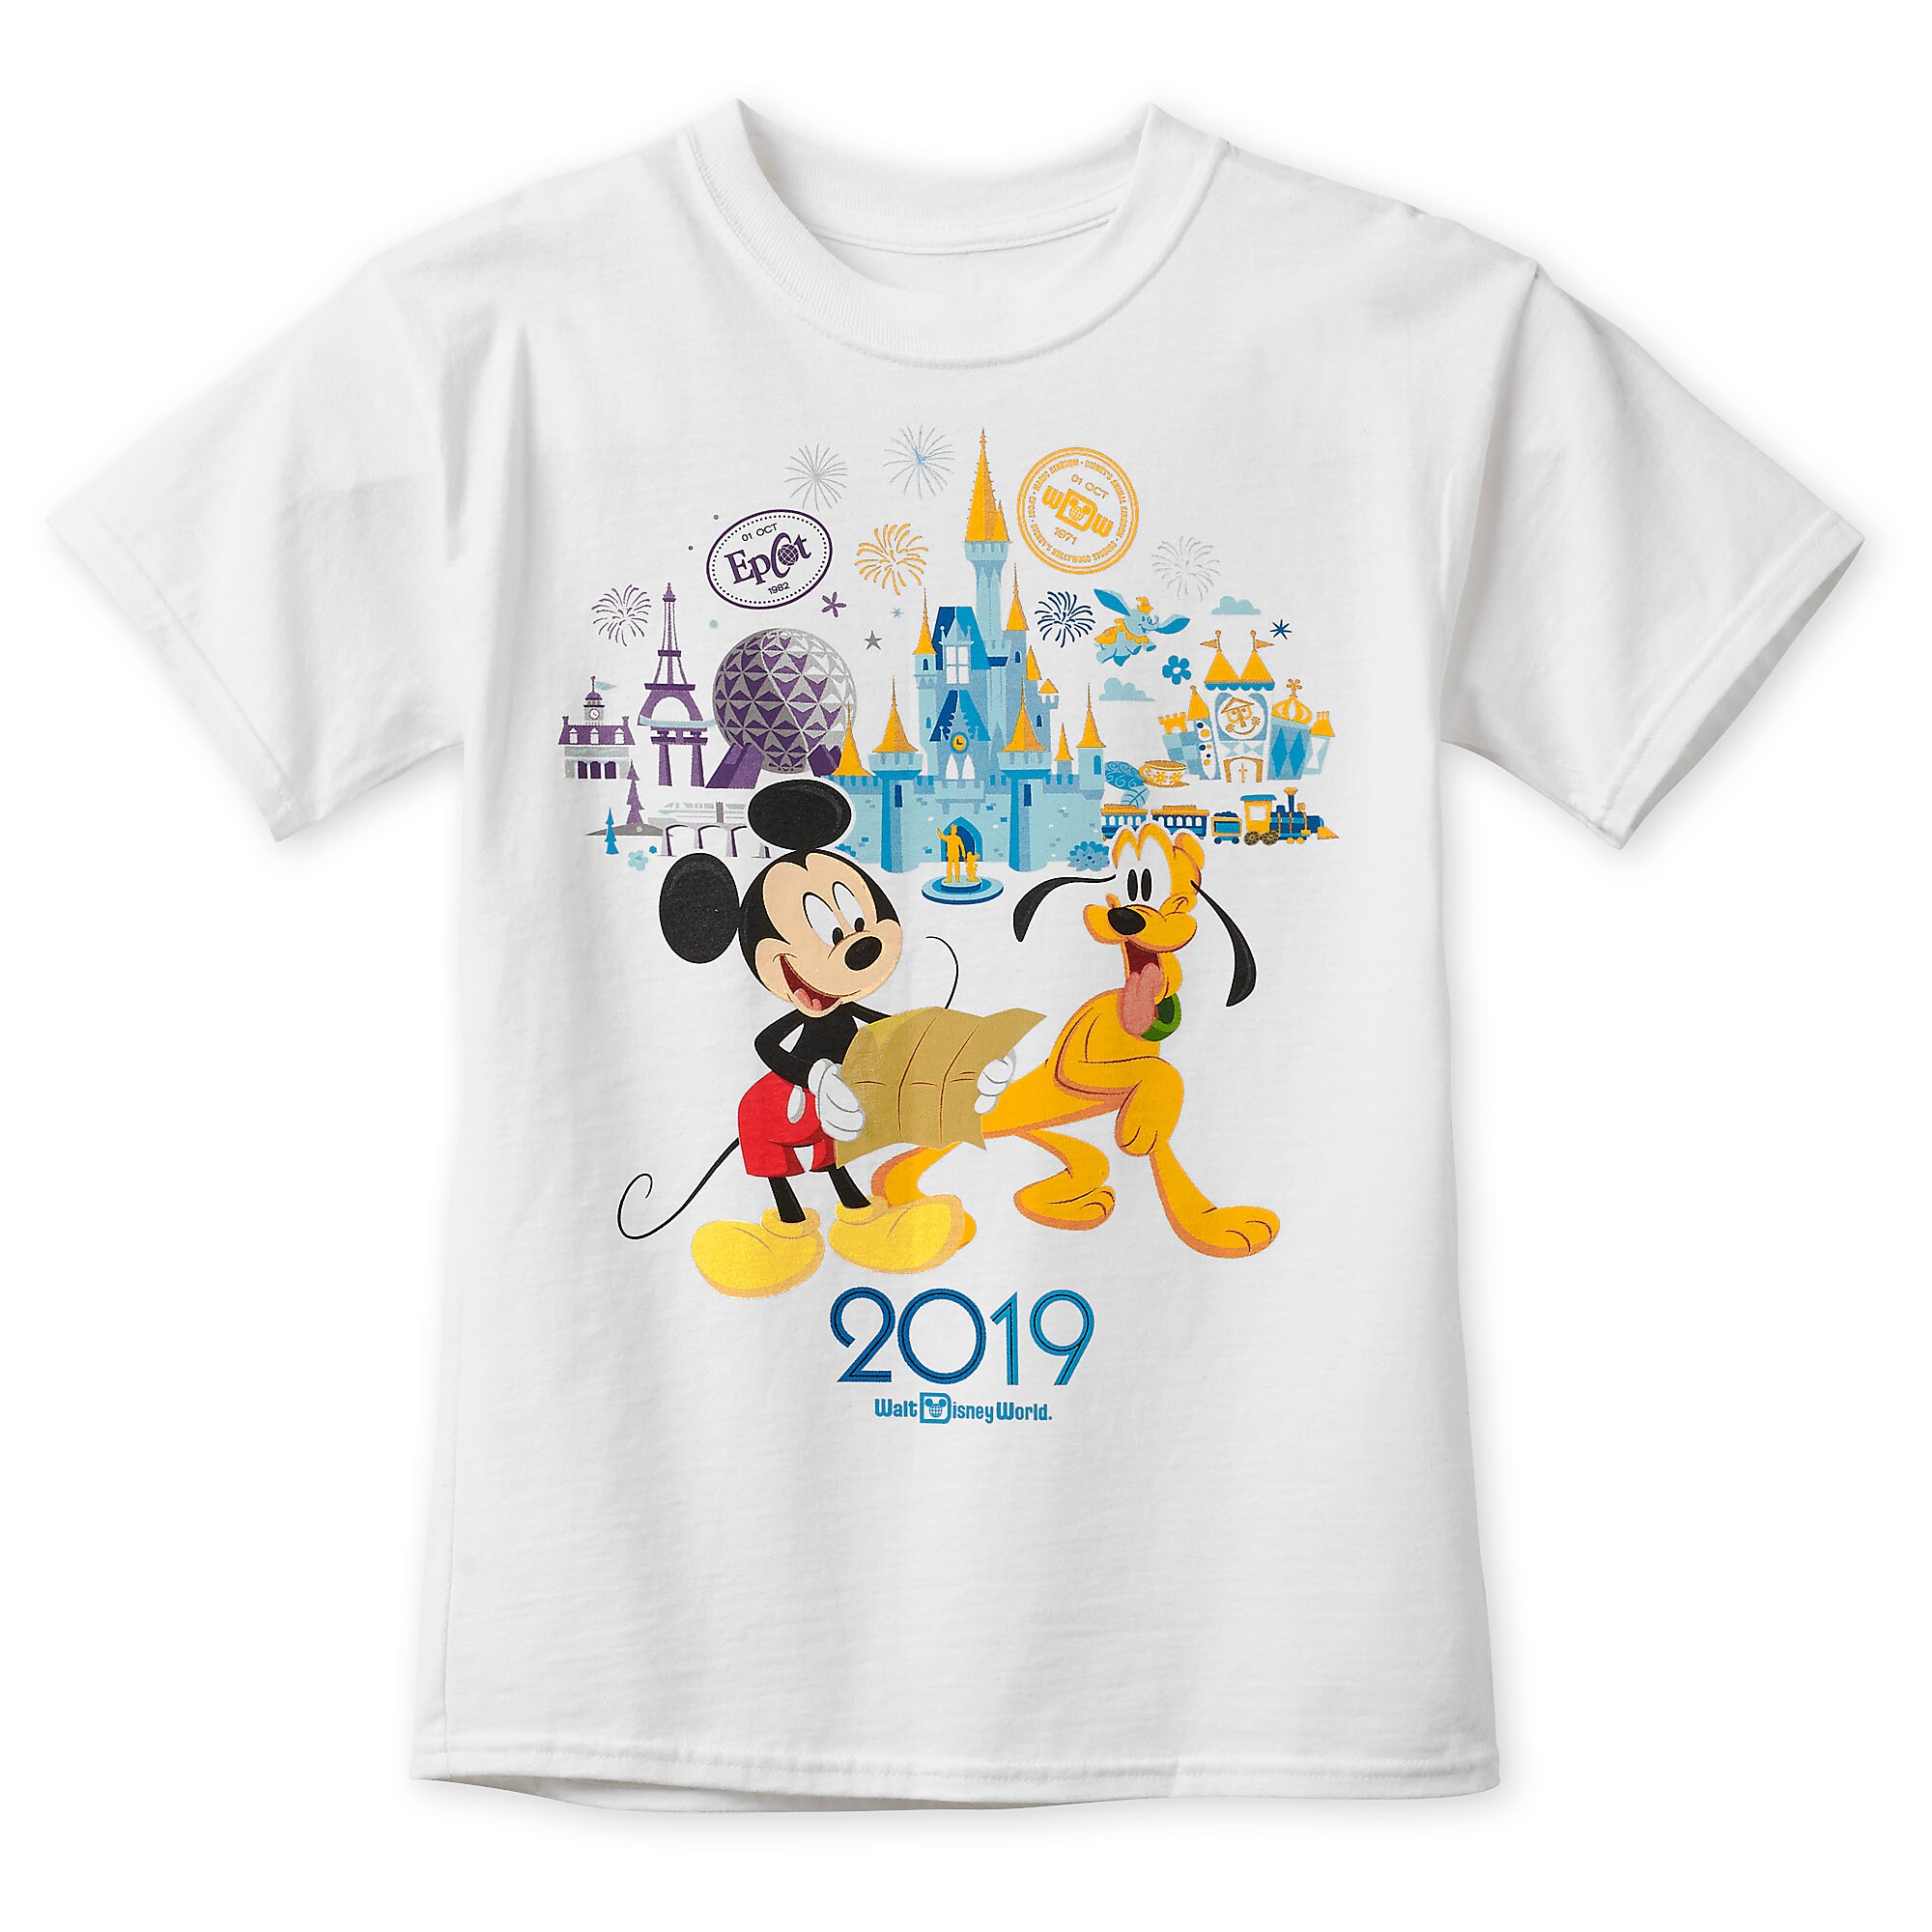 Mickey Mouse and Friends T-Shirt for Kids - Walt Disney World 2019